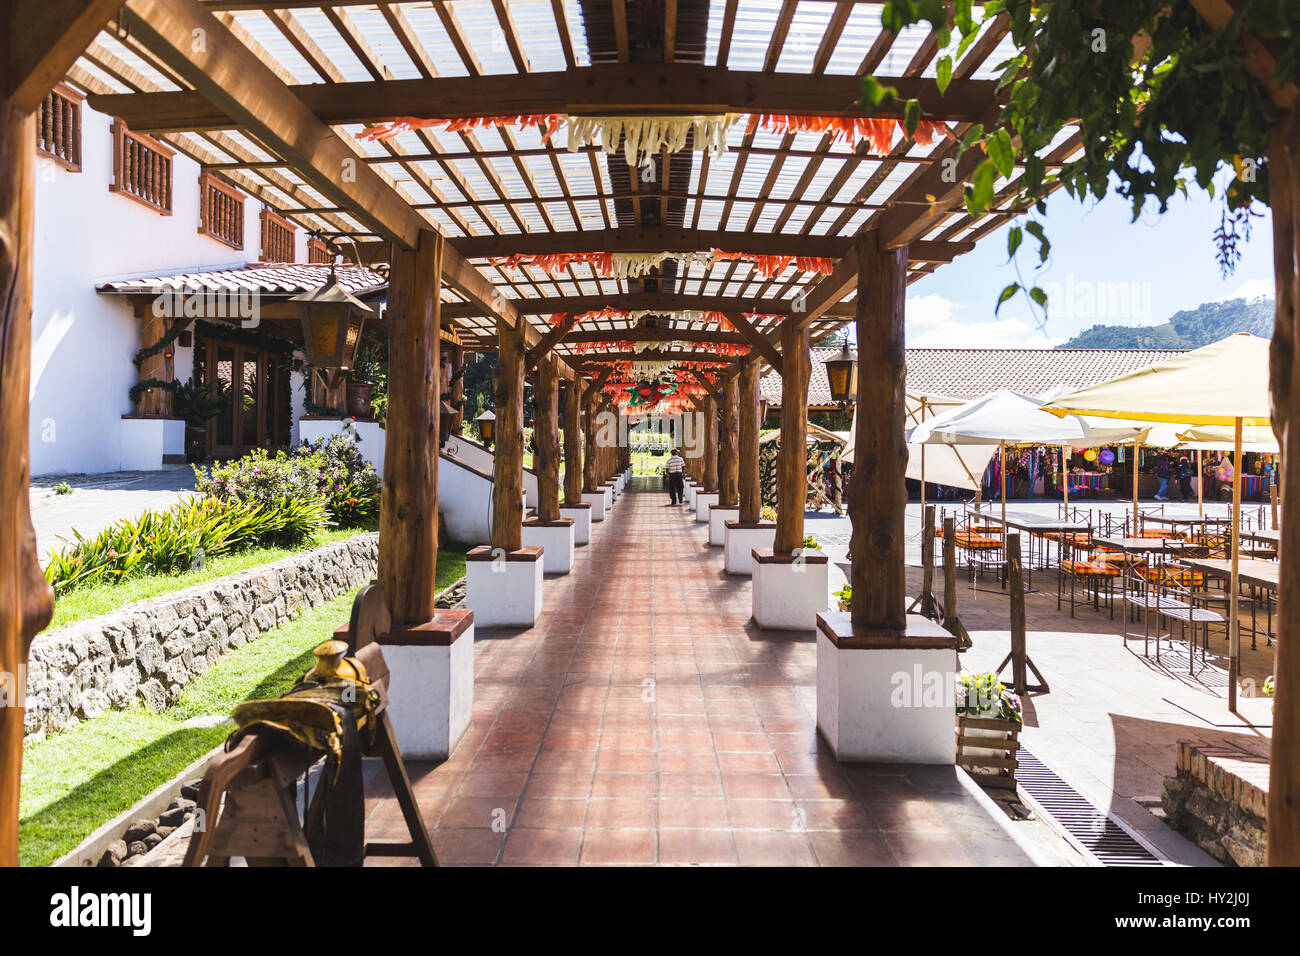 Large, beautiful covered patio in rural Guatemalan town. Sunny day setting. Stock Photo